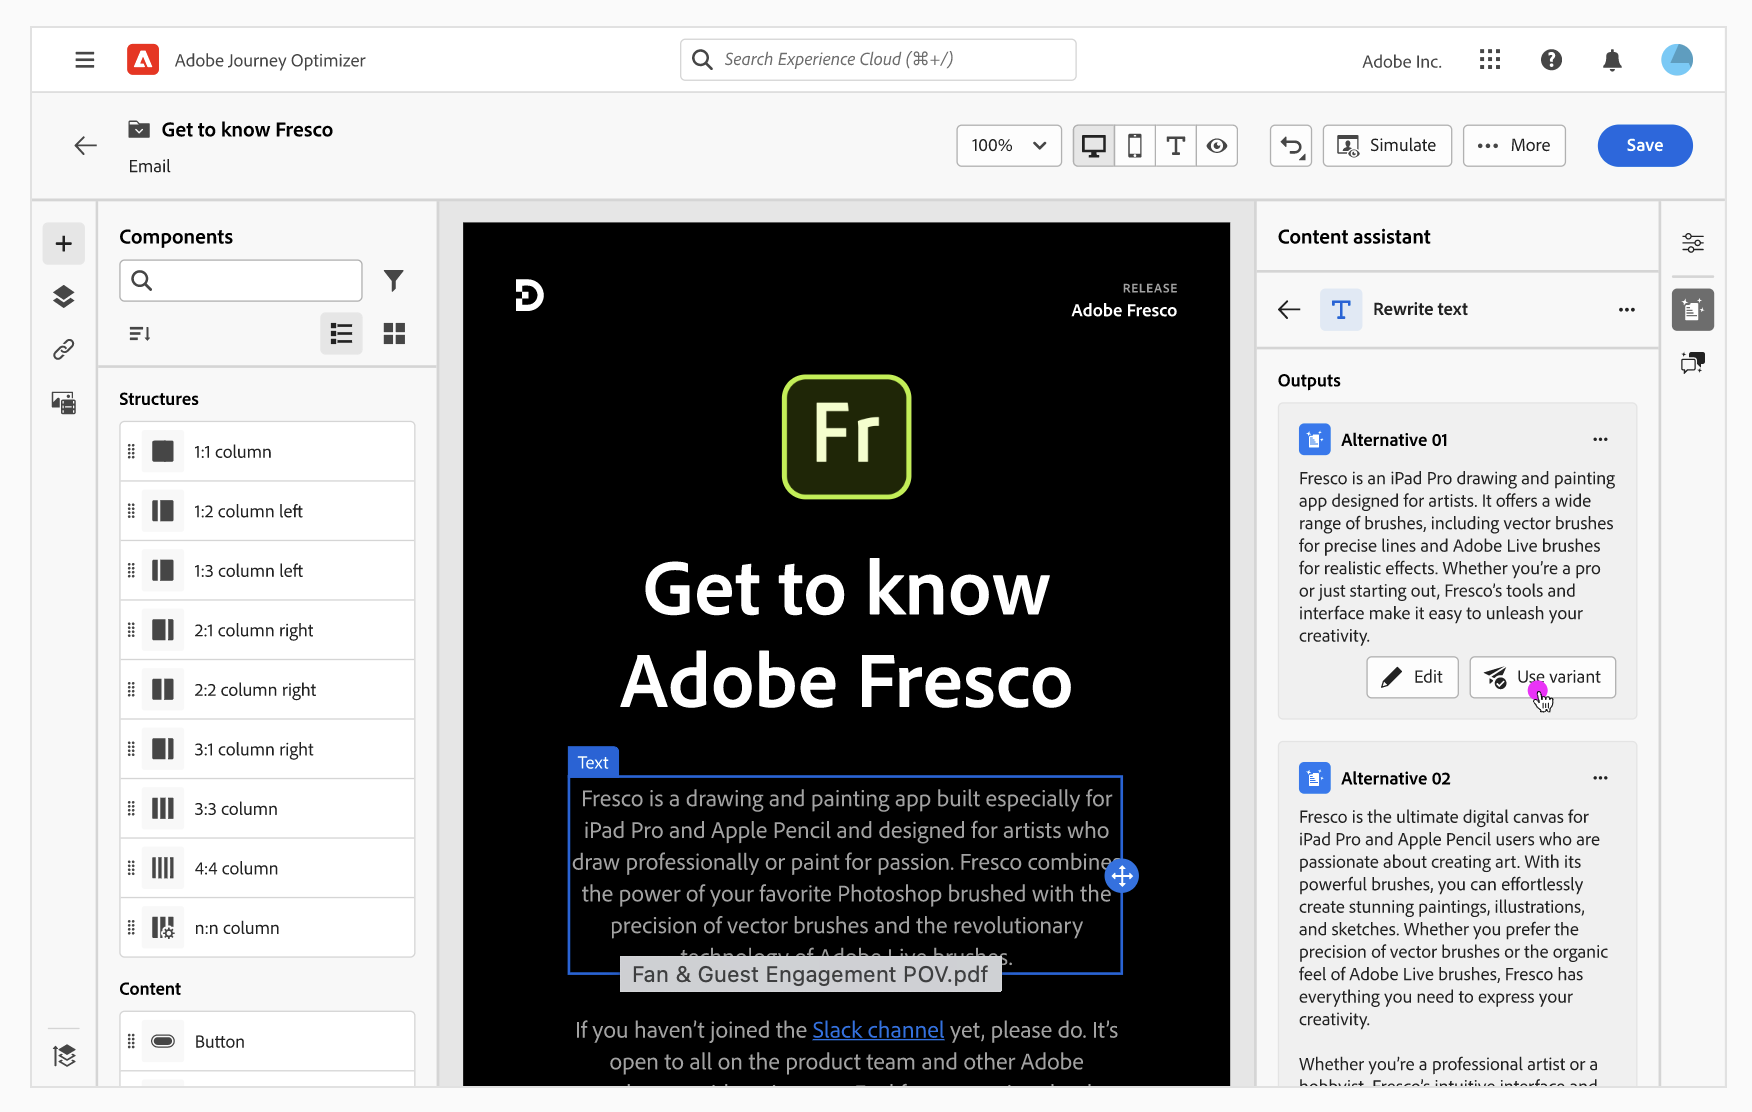 Adobe brings Firefly to the enterprise 3